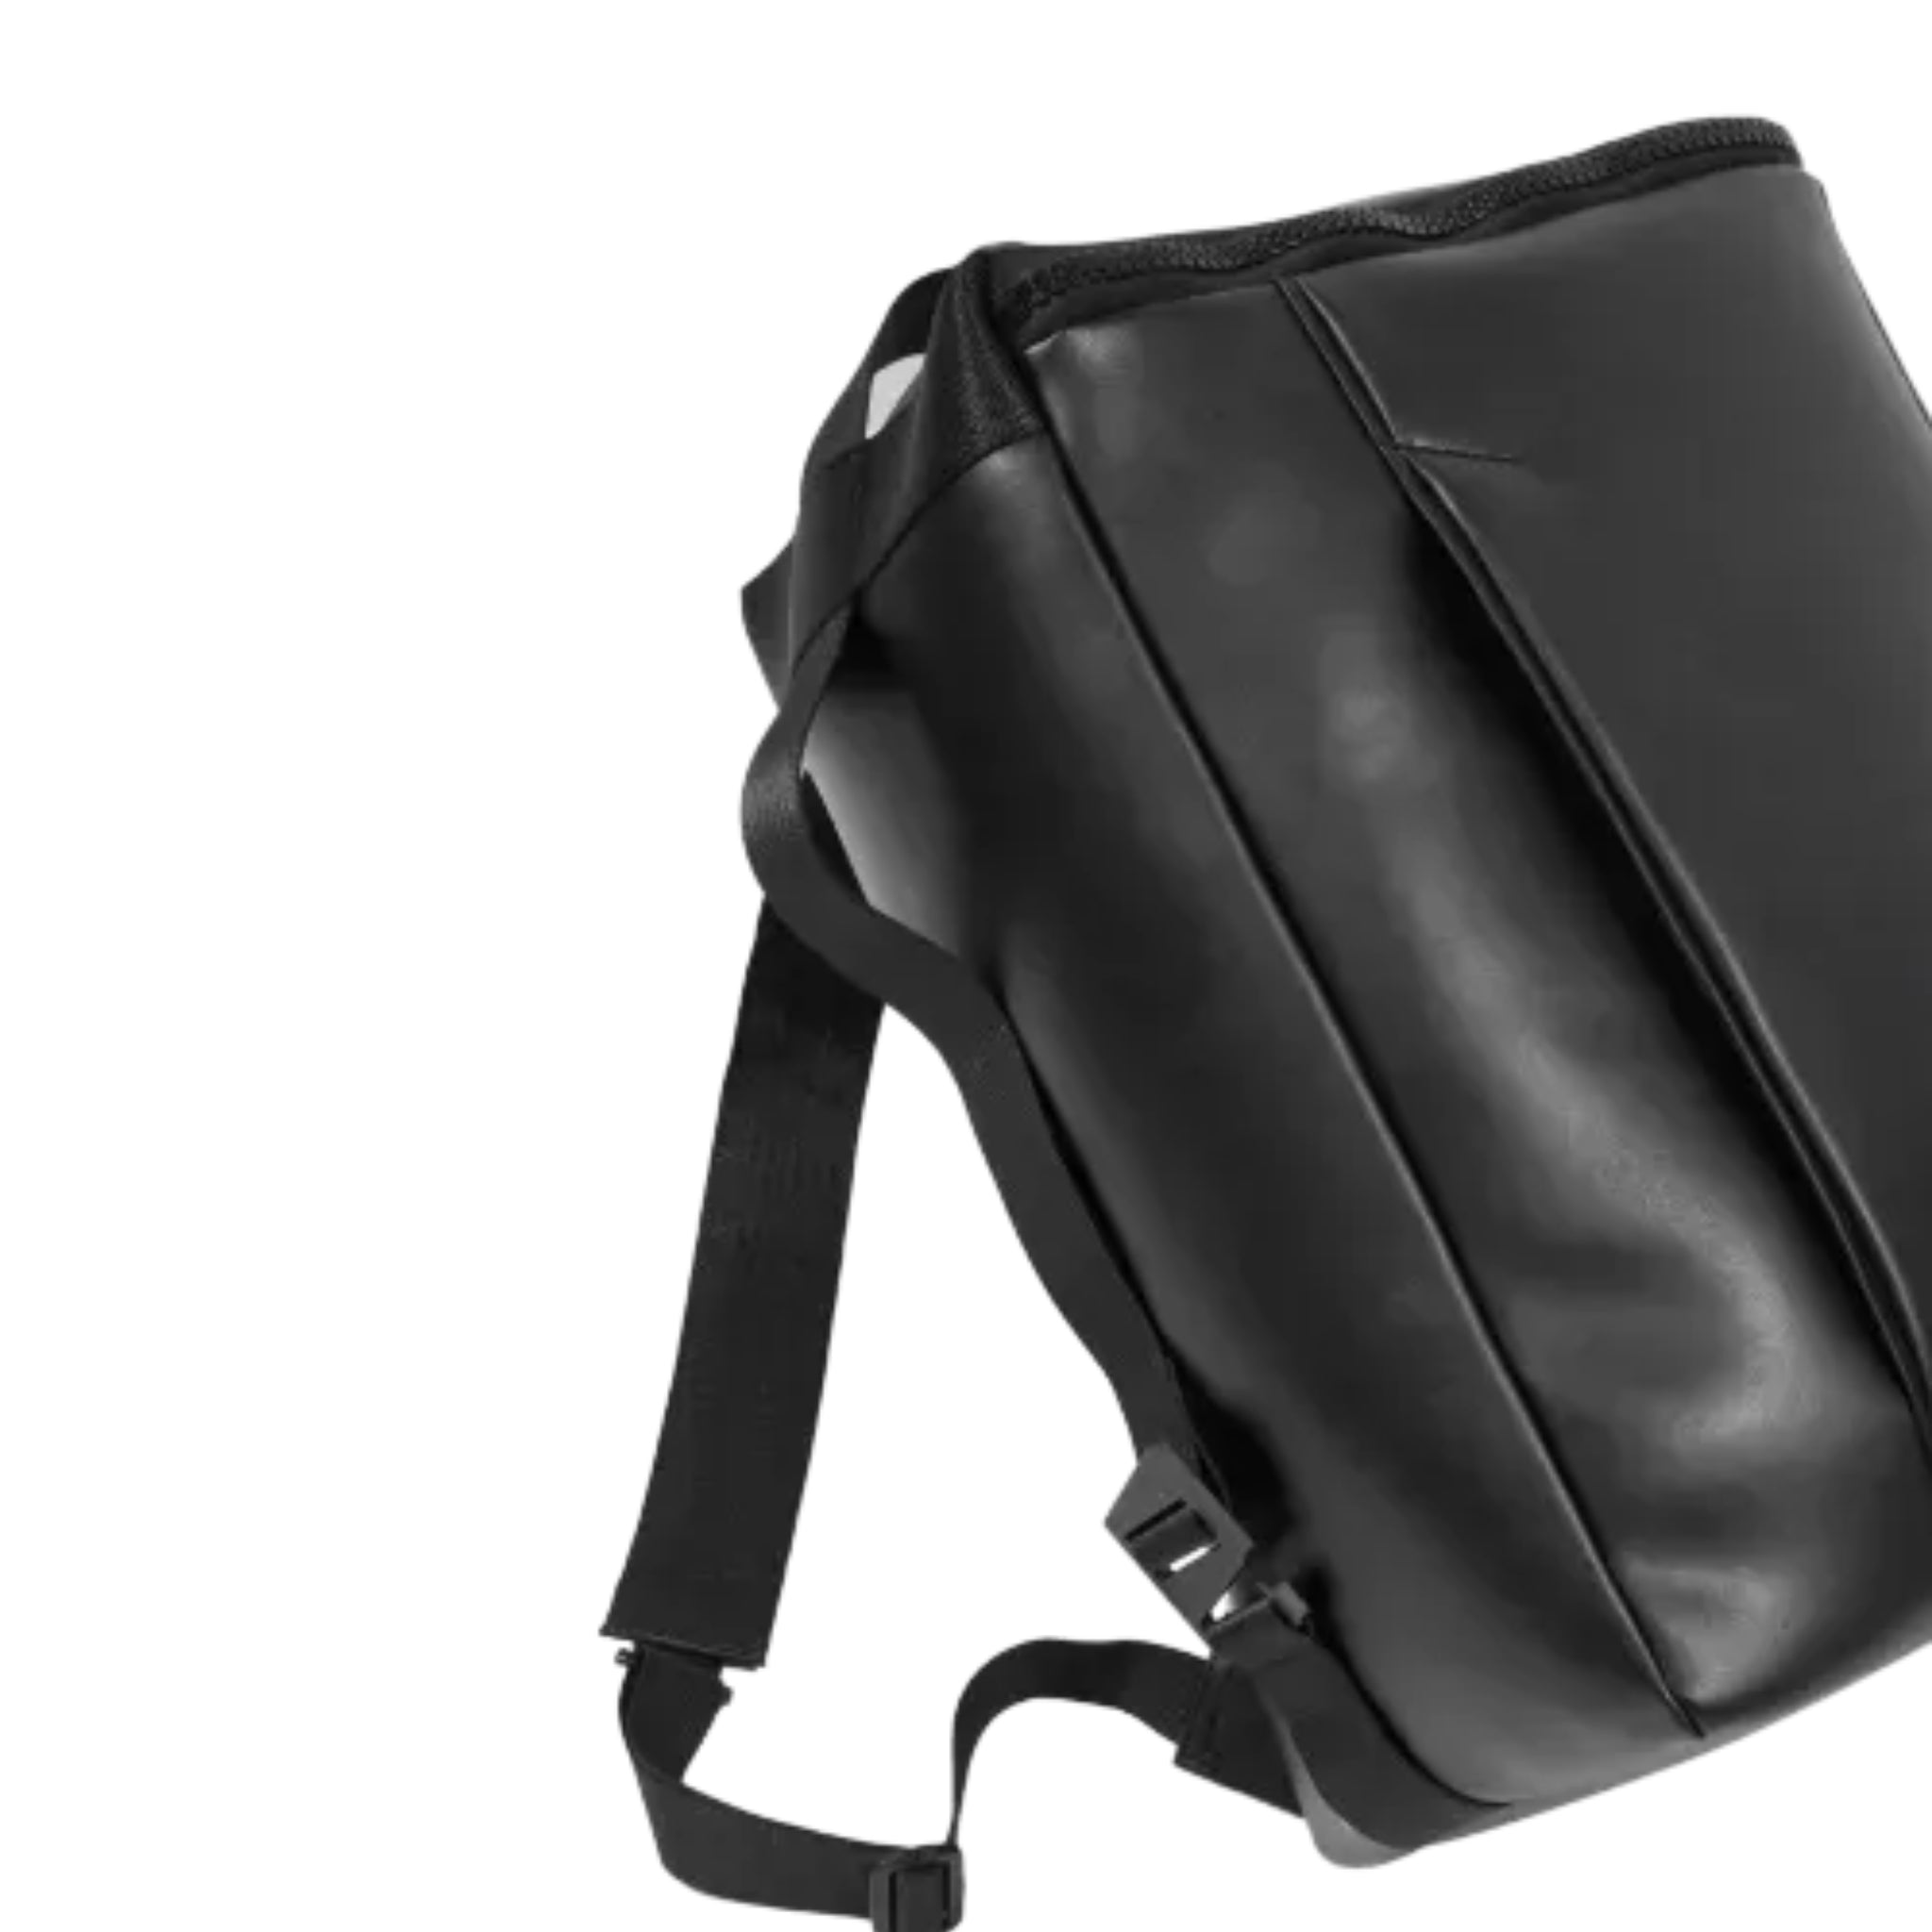 Details of an Interesting rectangular shaped backpack in black vegan leather material (Desserto) on a white background.